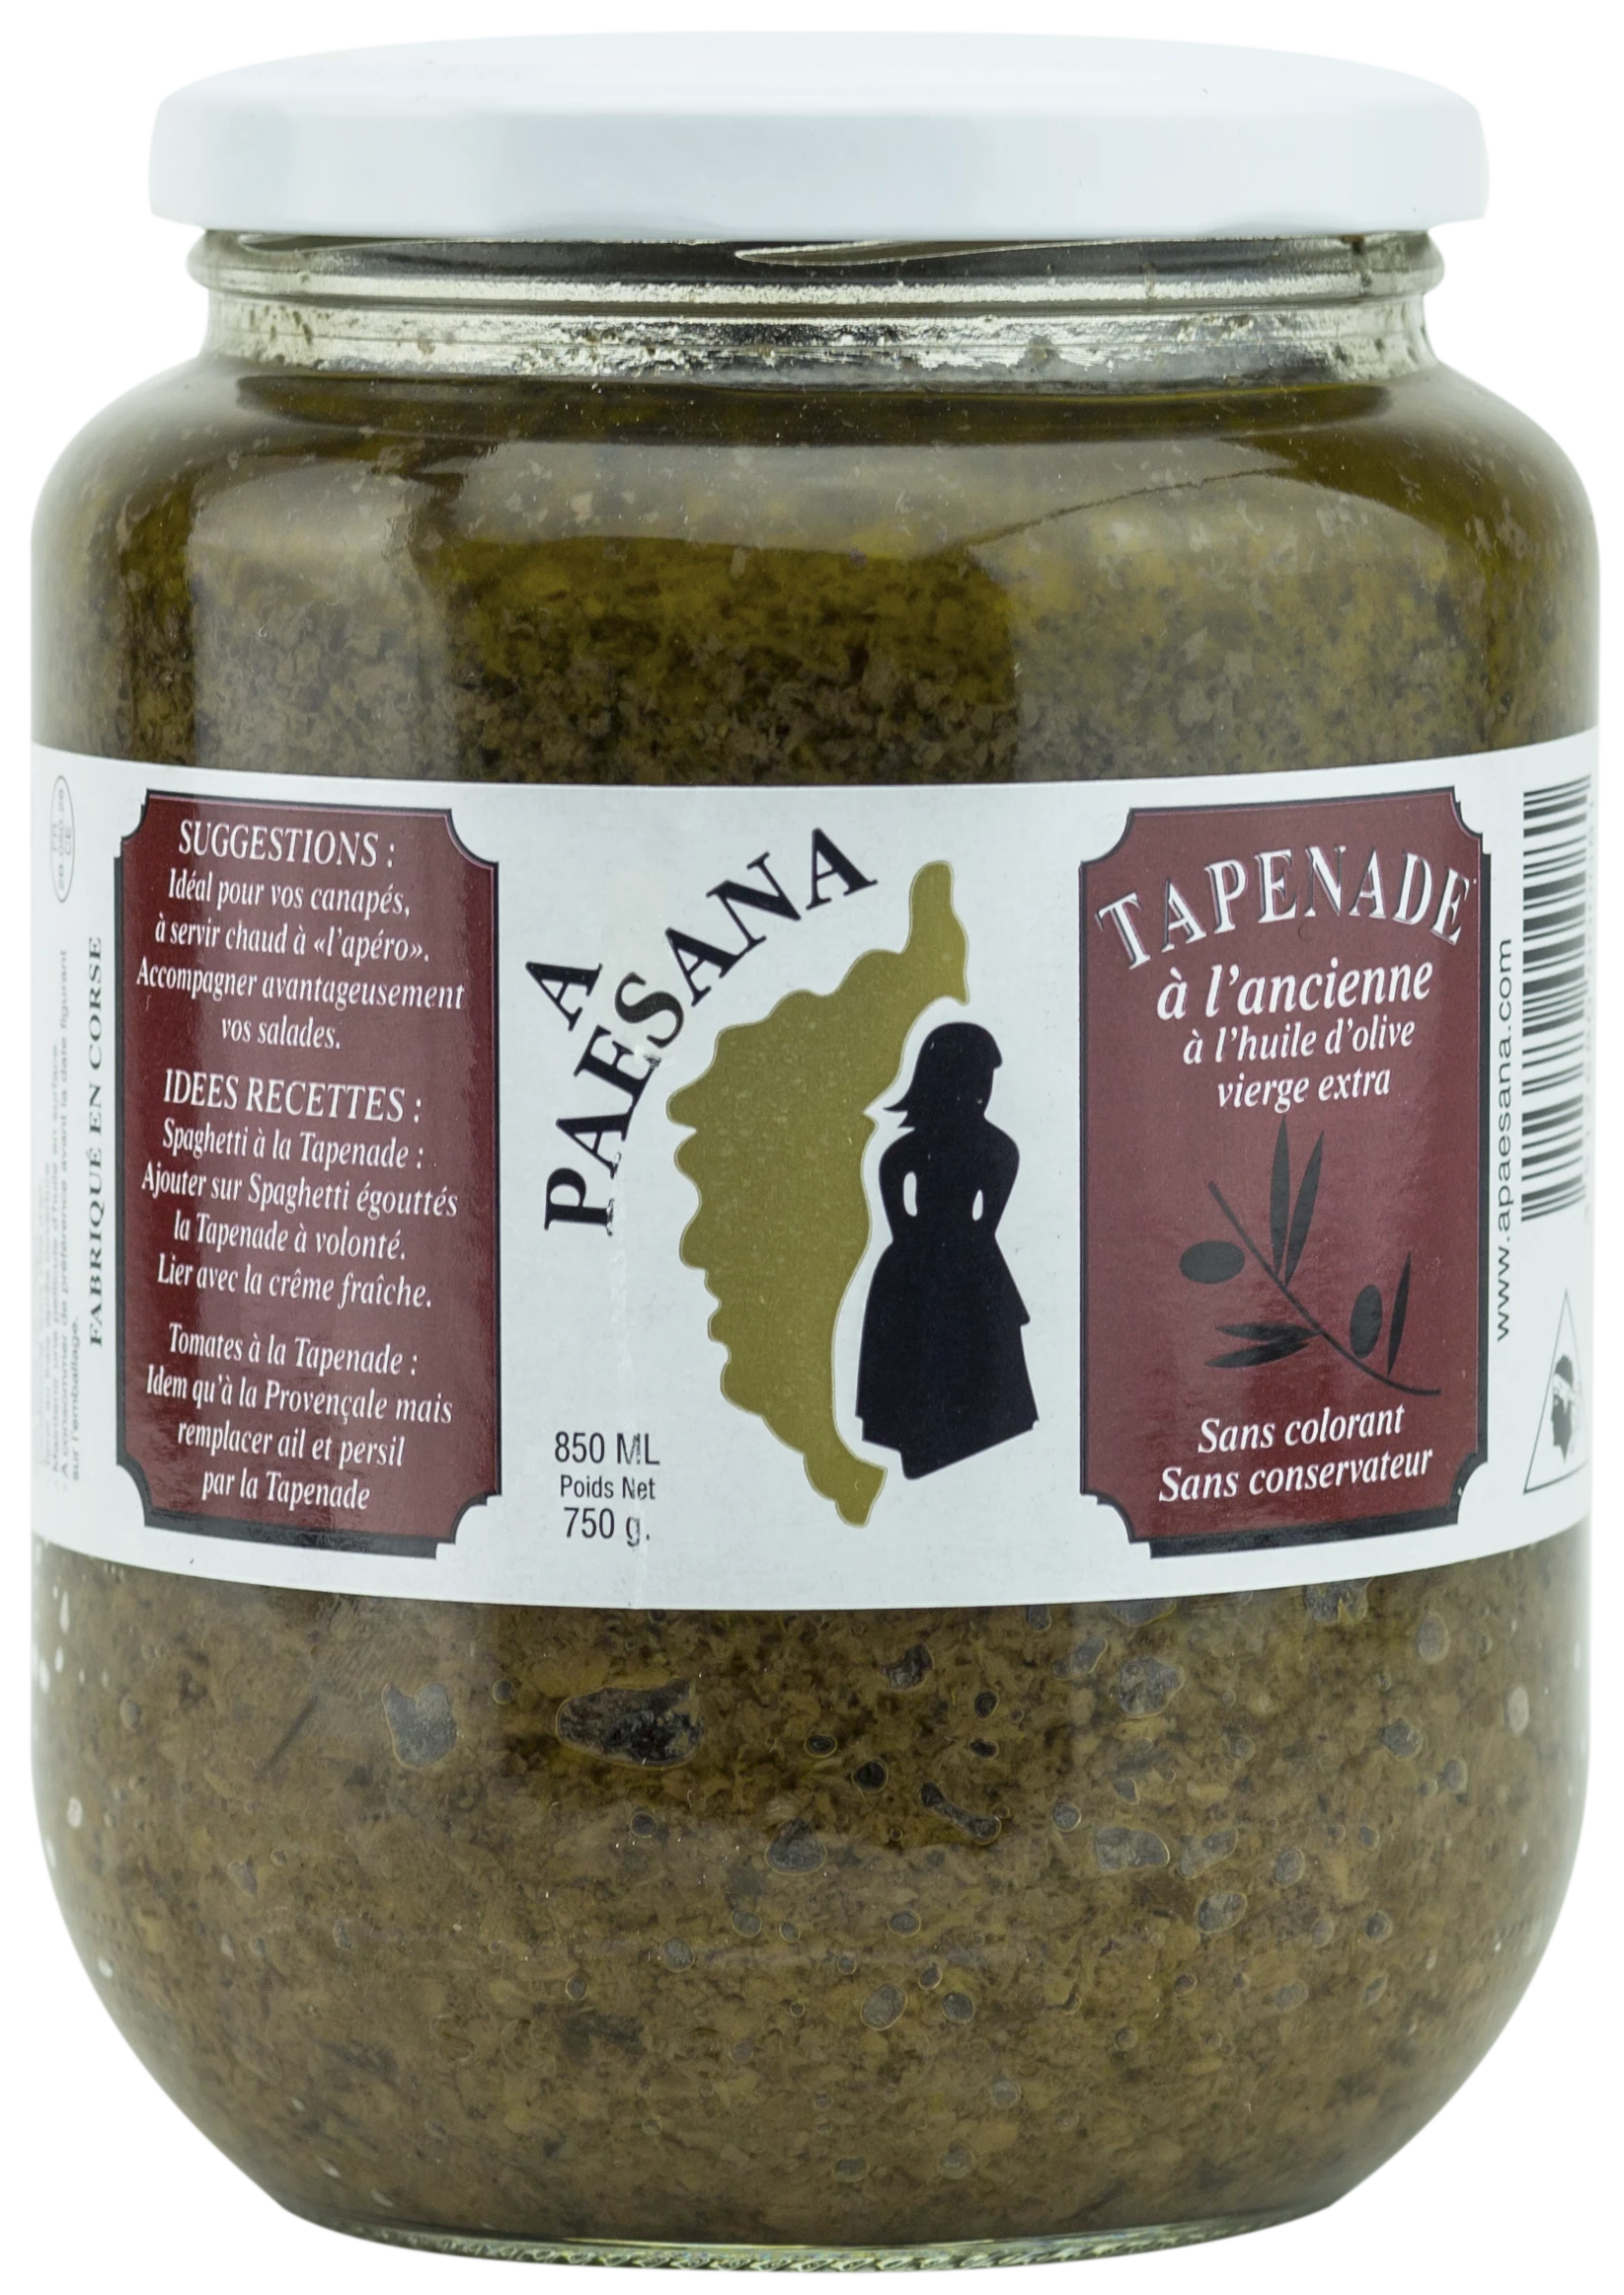 Old-fashioned Tapenade with Extra Virgin Olive Oil, 750g - A PAESANA